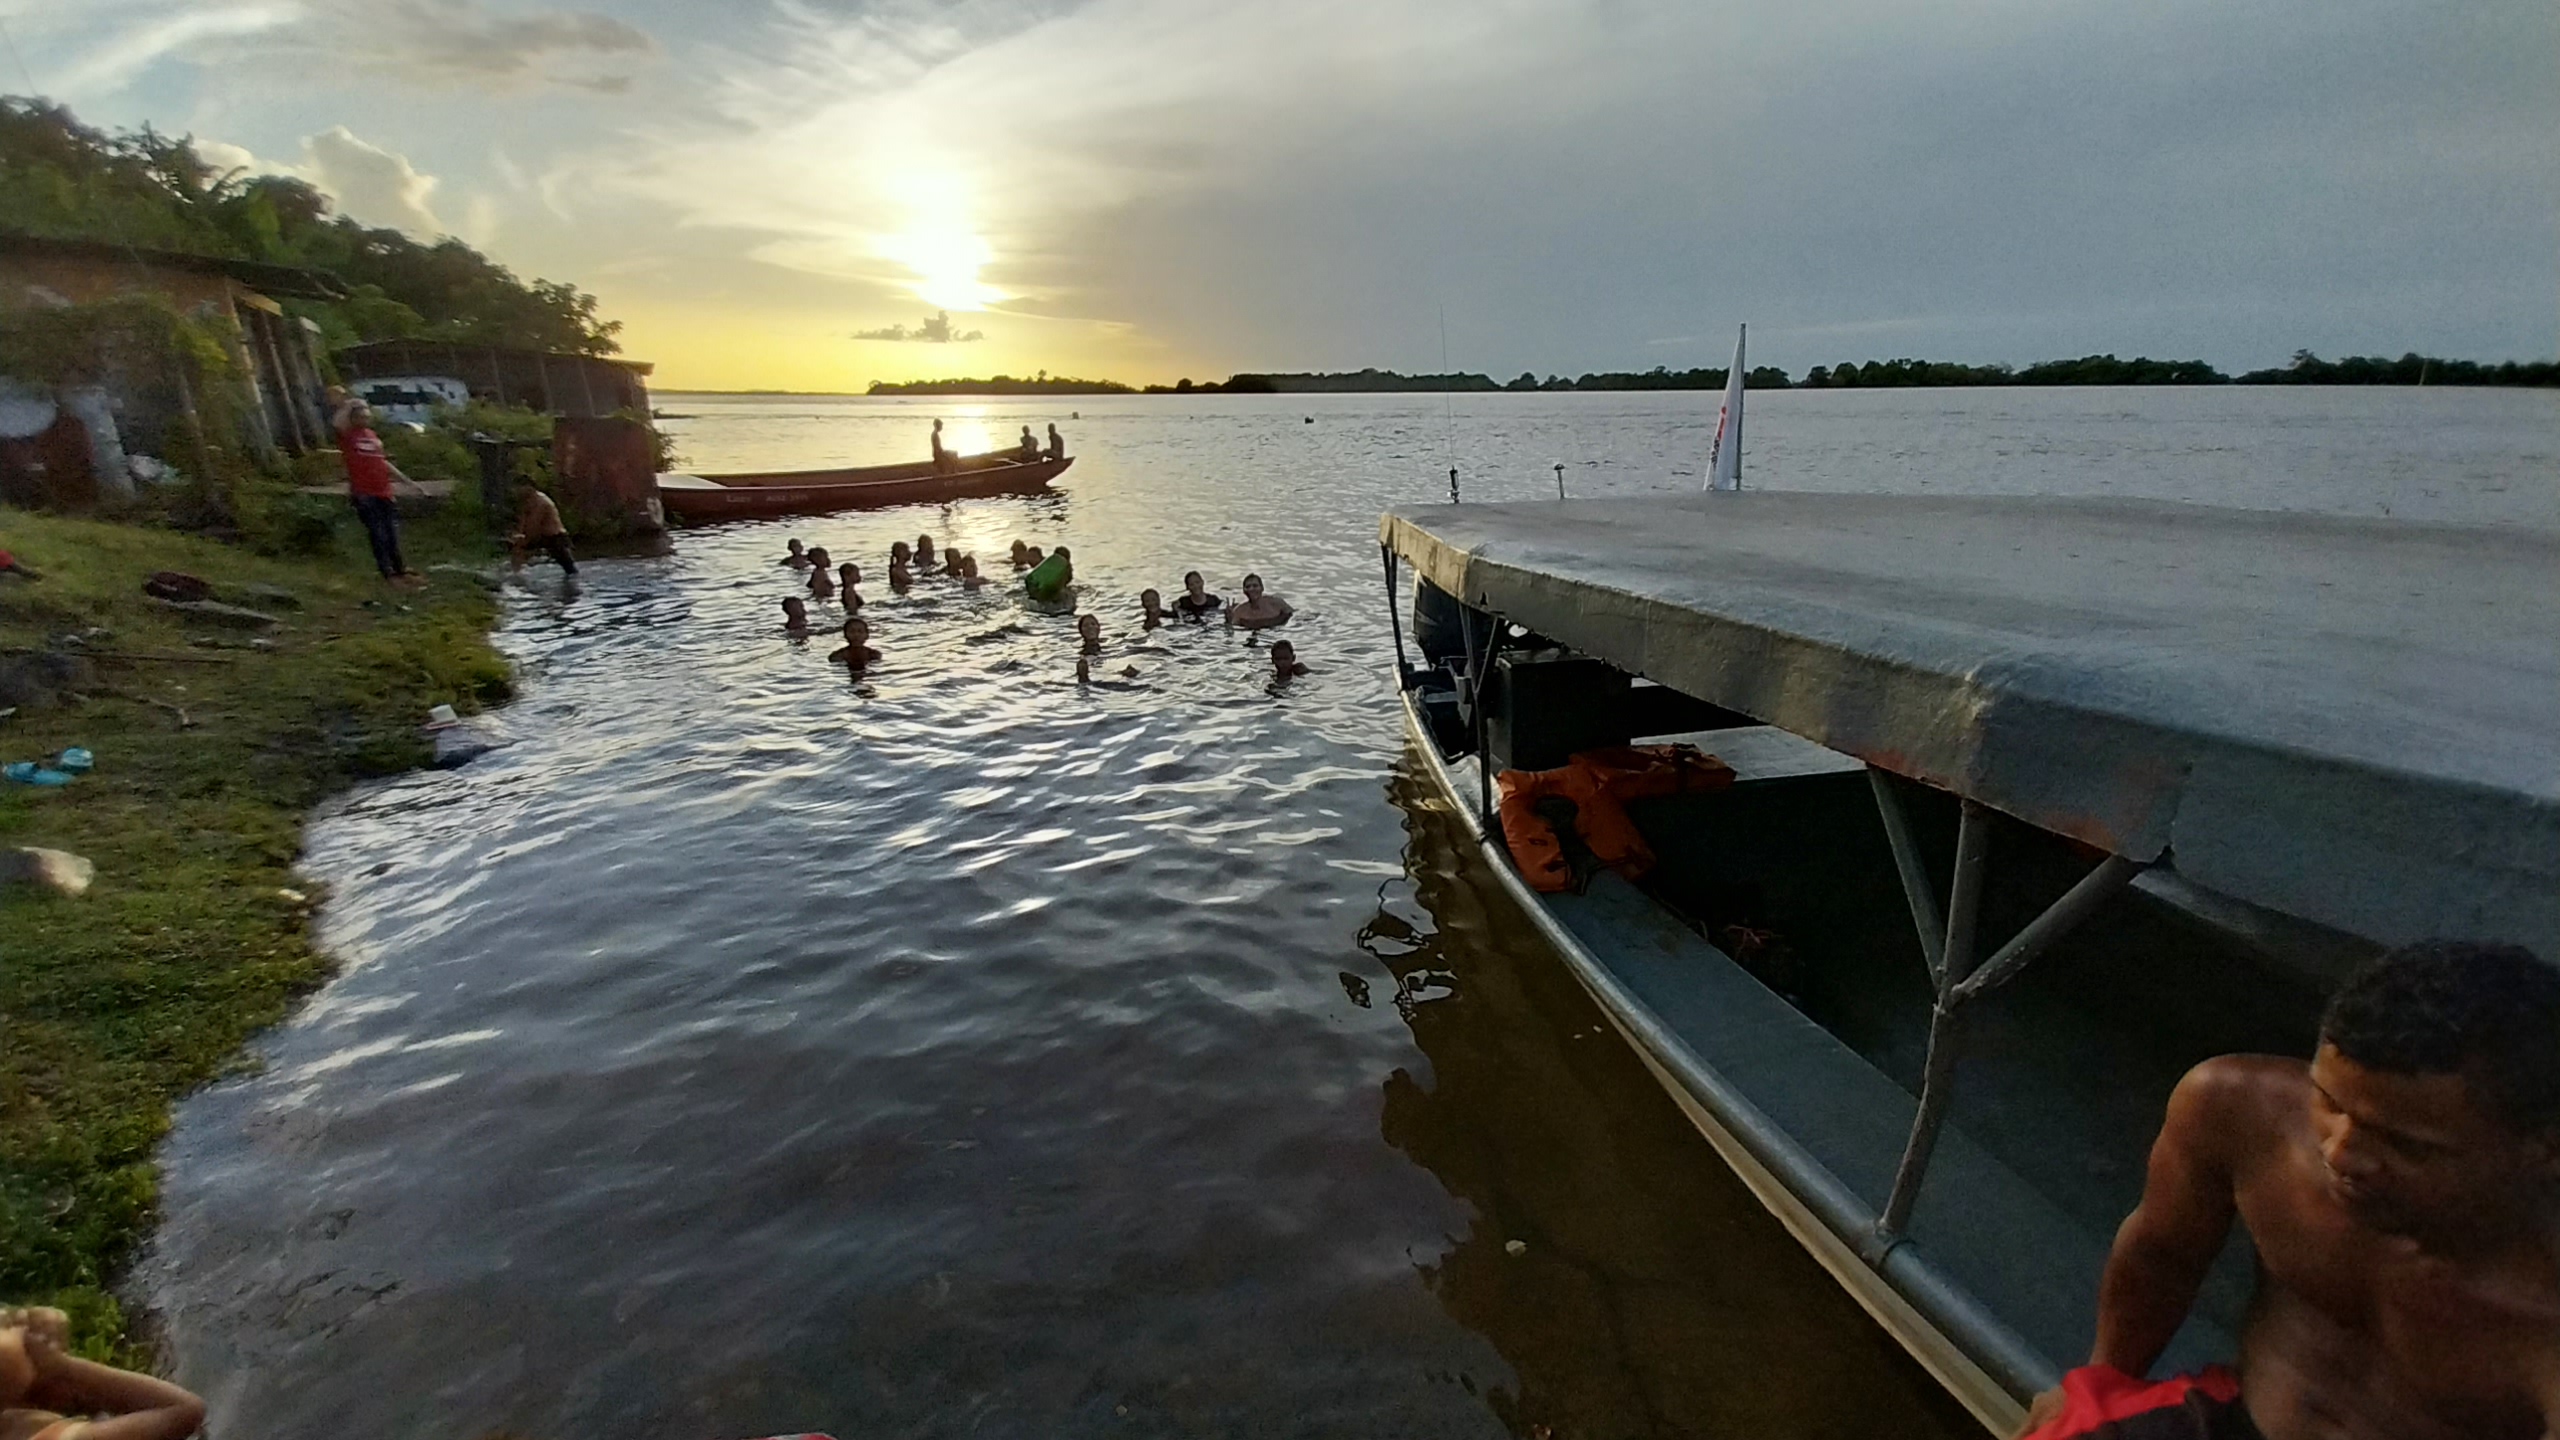 Sunset at the riverbank, the community gathers to cool off in the Orinoco.